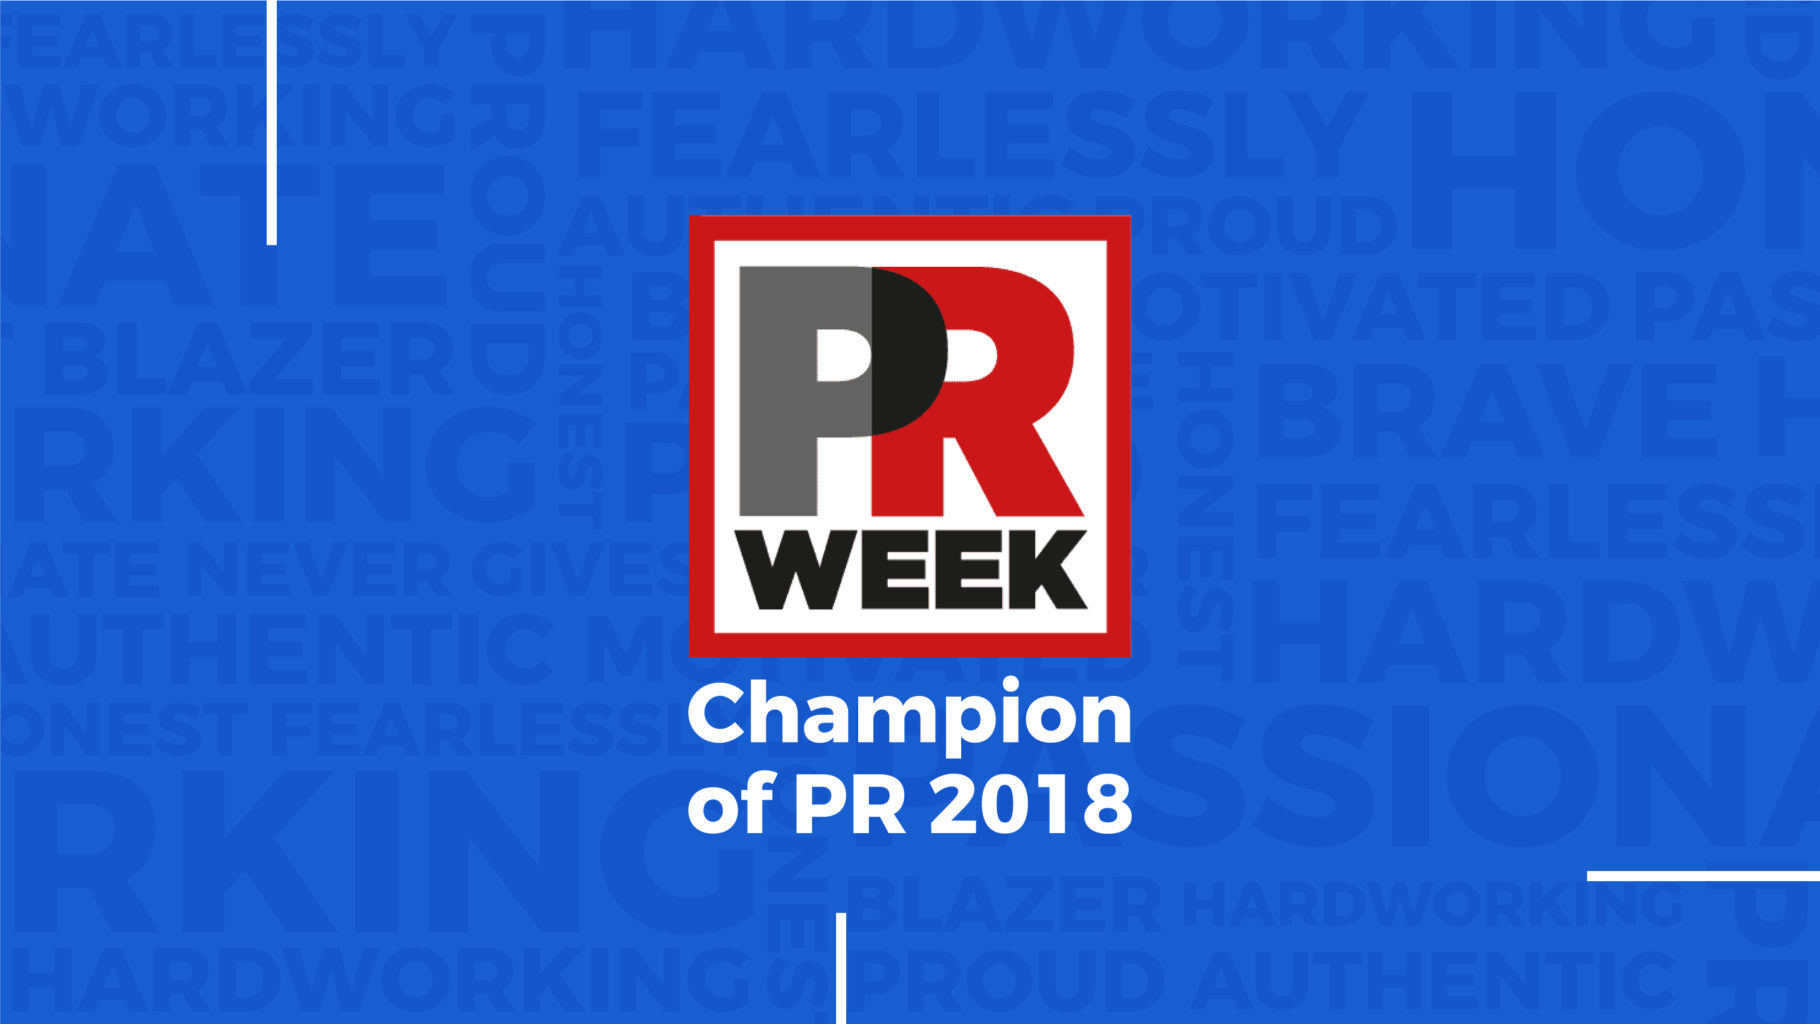 MMD’s Chrys Sbily Named a 2018 PRWeek “Champion of PR”